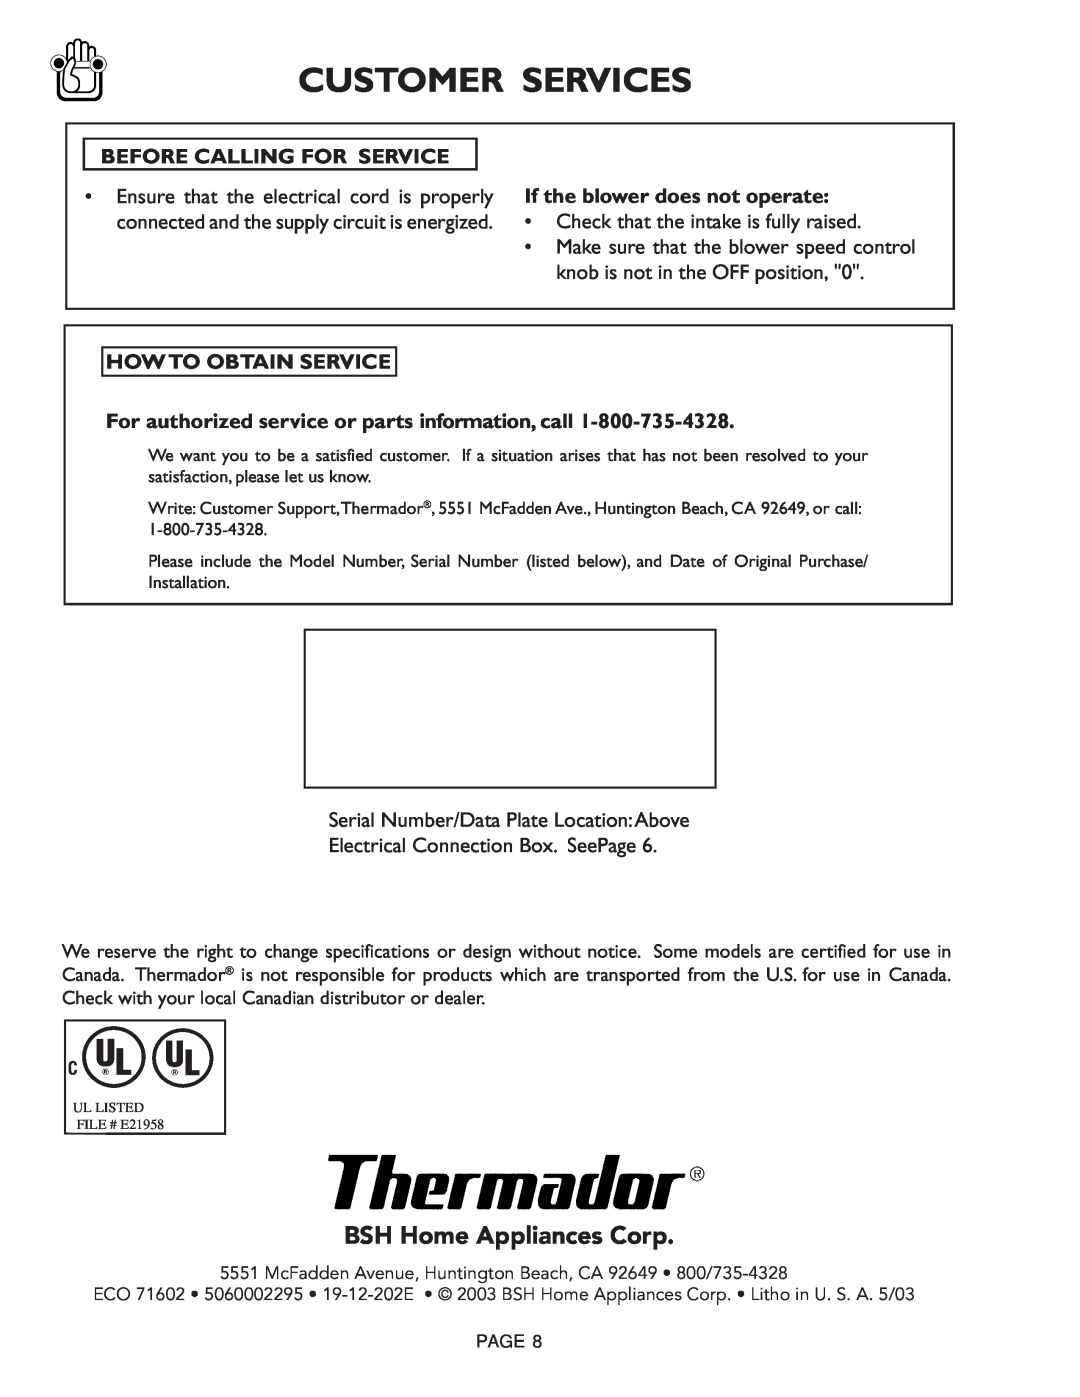 Thermador CVS36R Before Calling For Service, If the blower does not operate, How To Obtain Service, Customer Services 